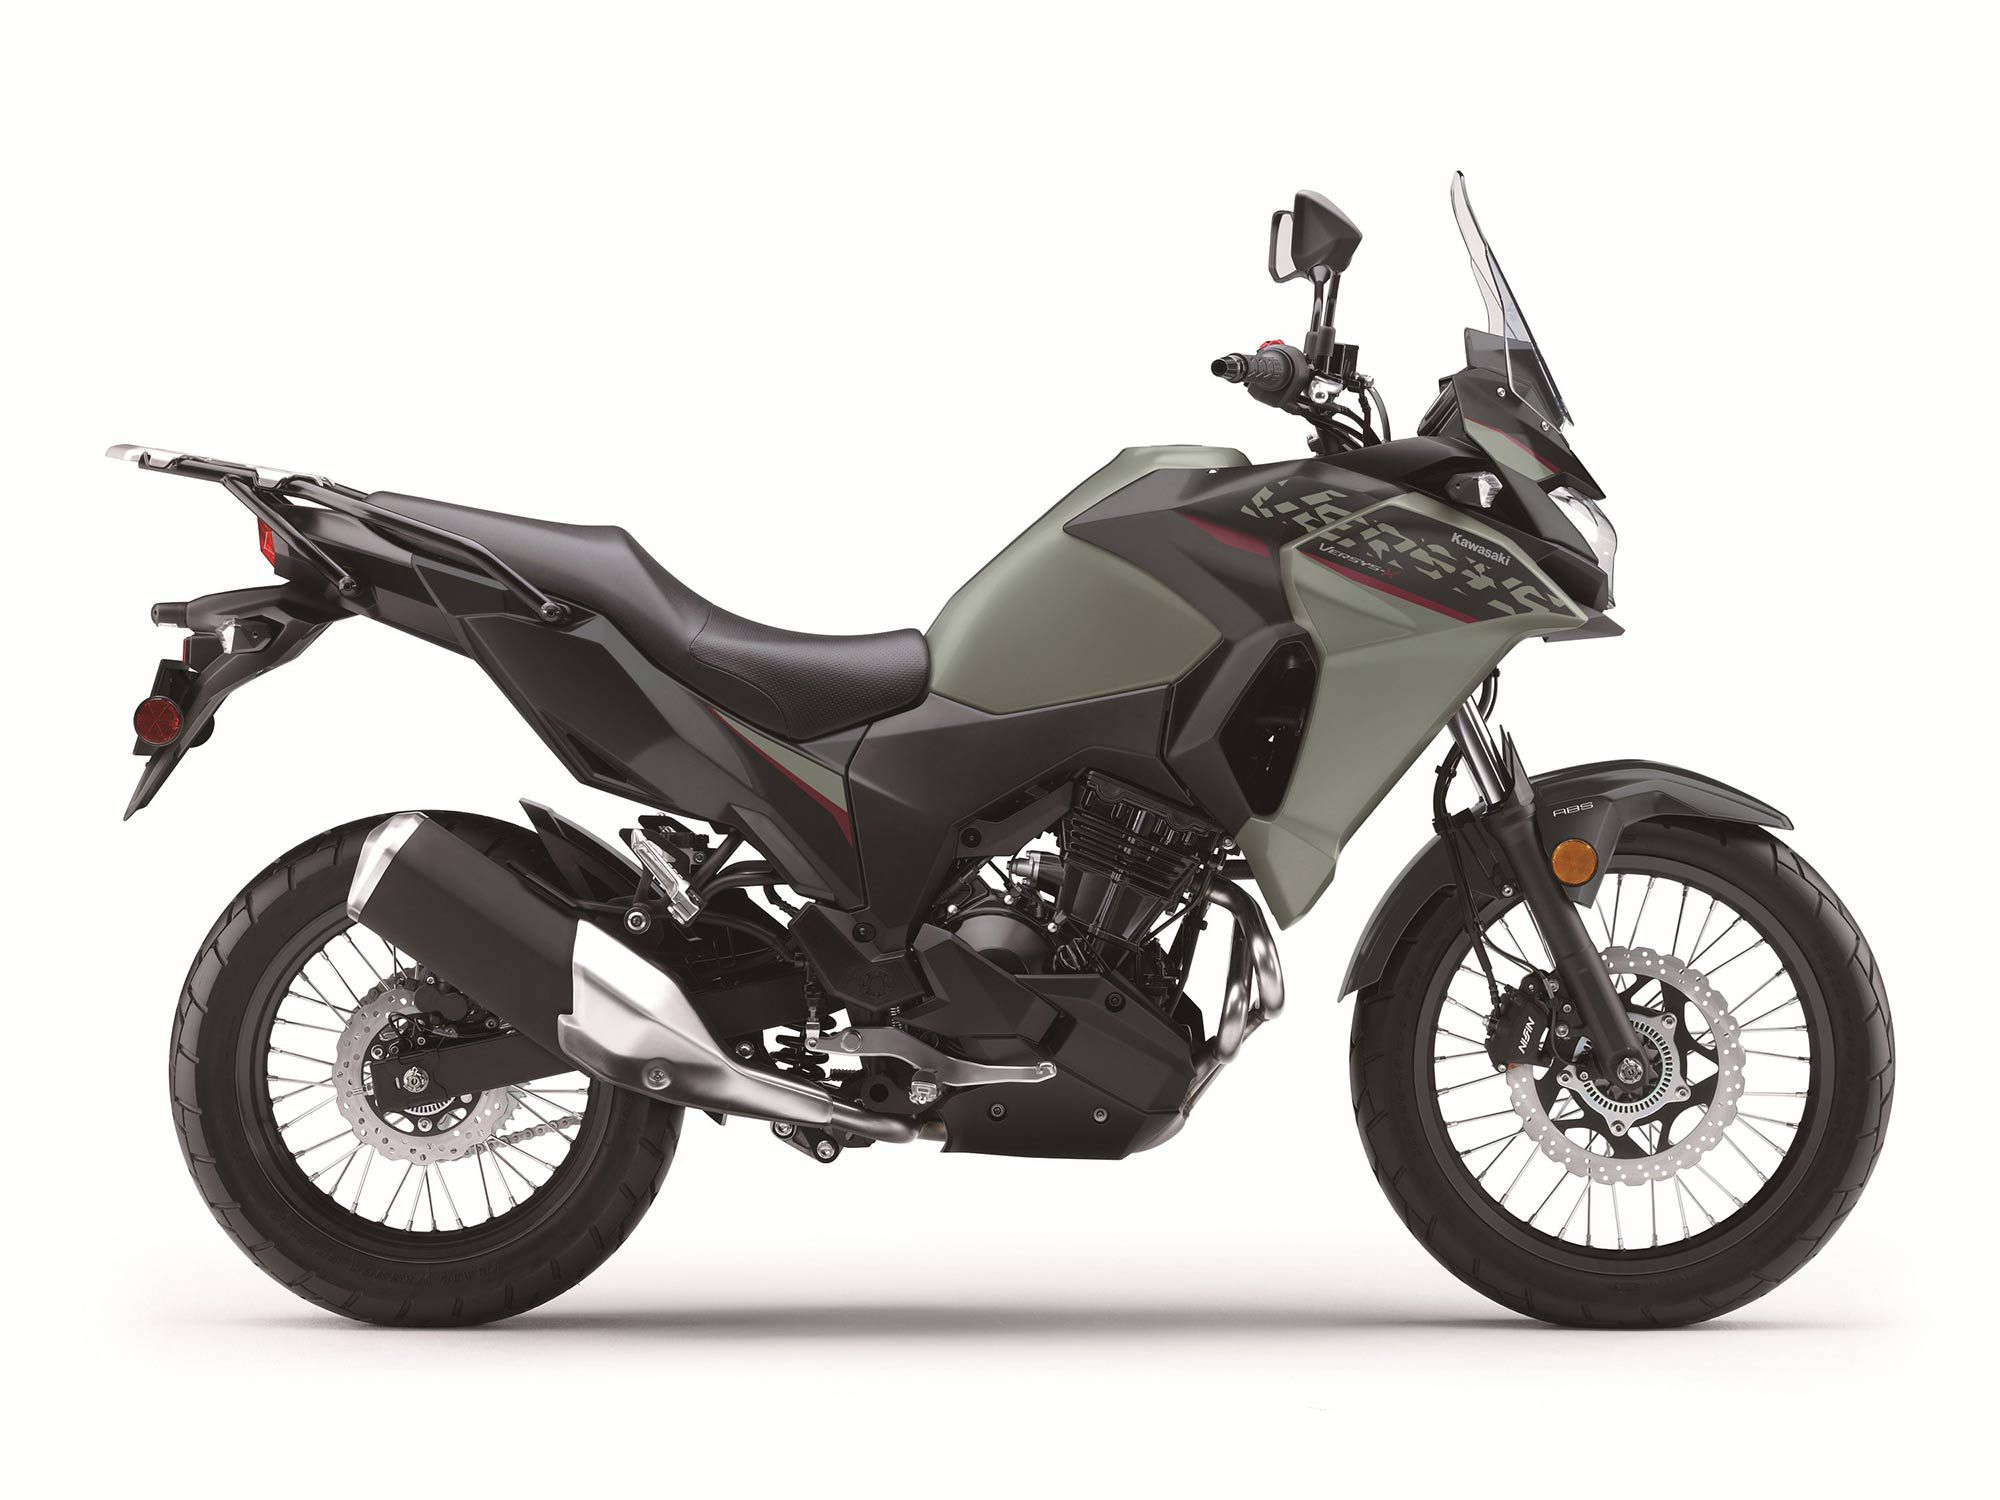 The Versys-X 300 will retail for $5,899 (without ABS) or $6,199 (with ABS). Both come in the new color.